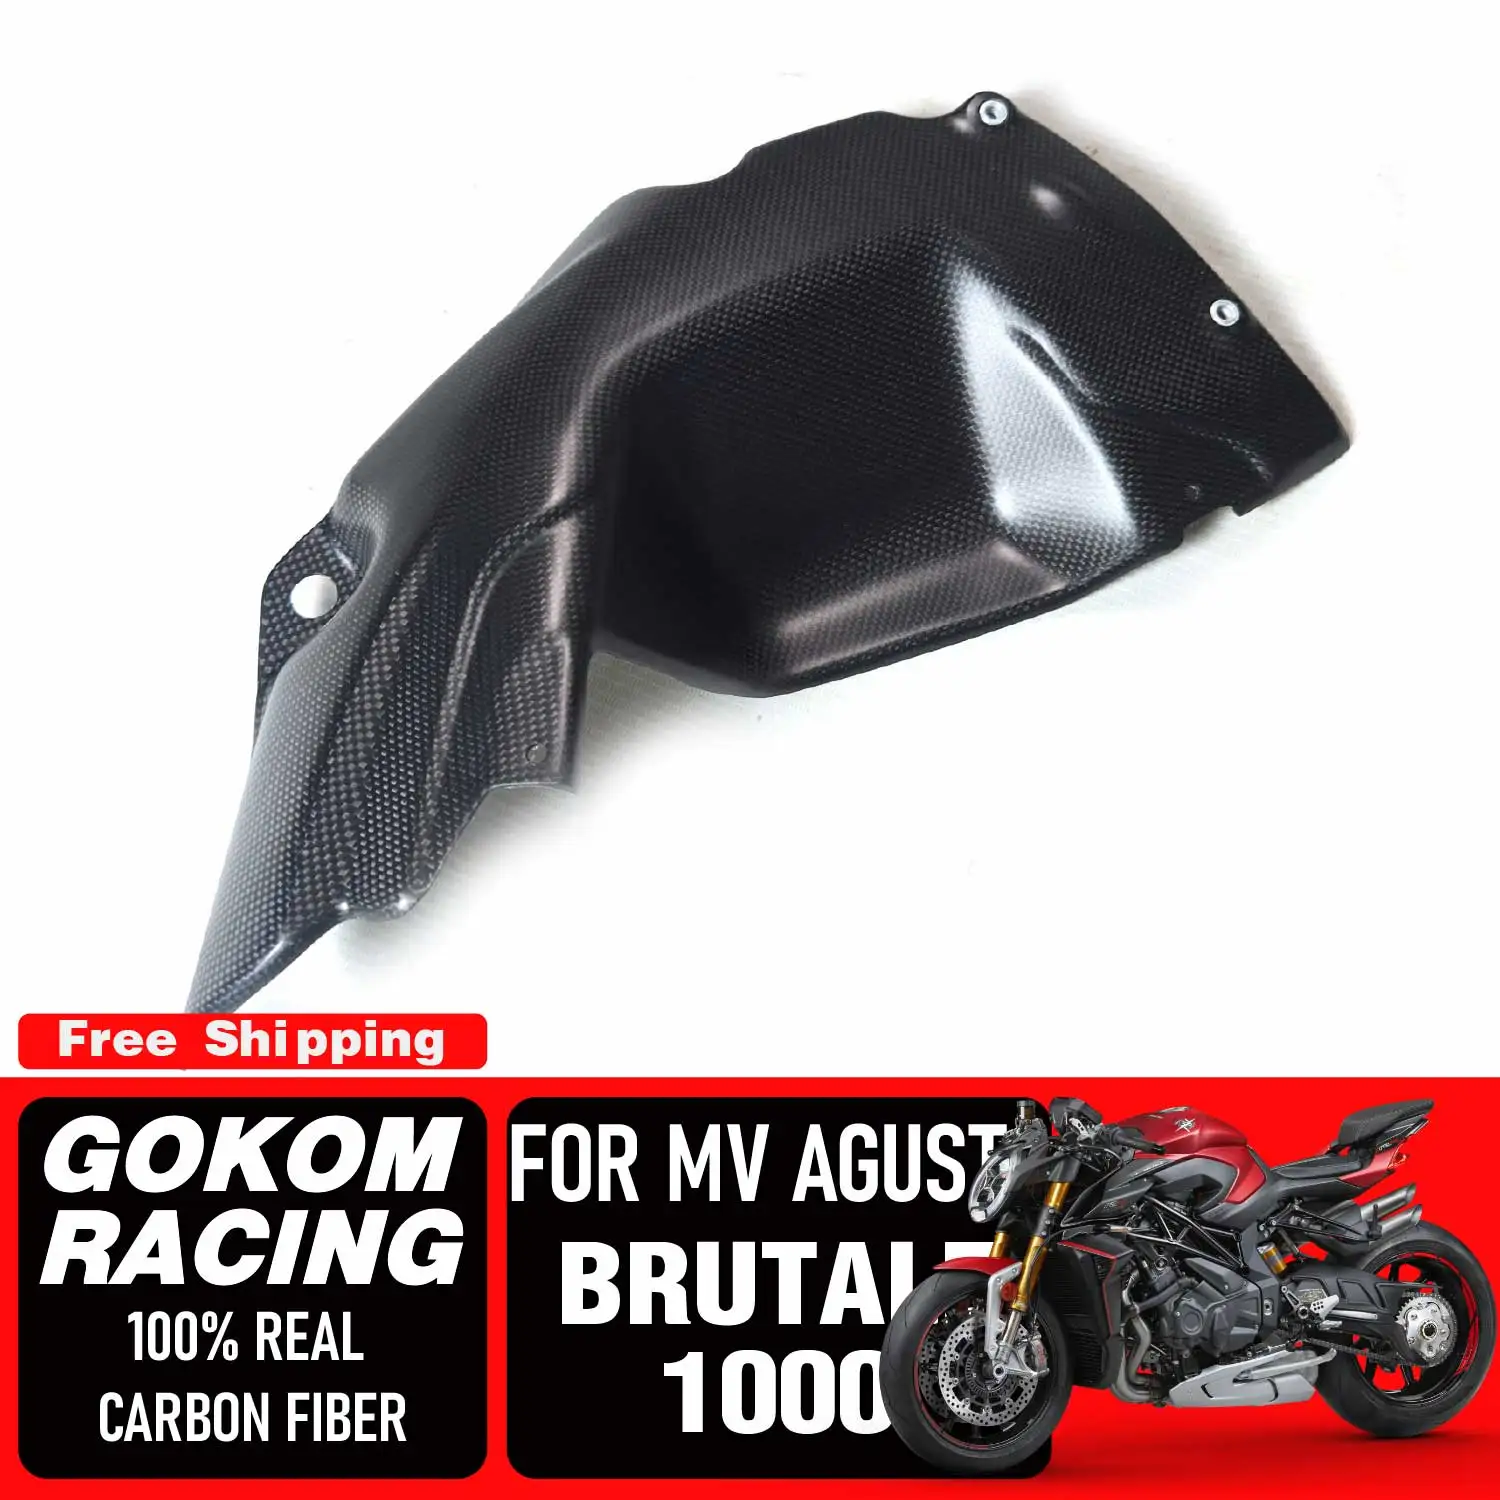 

Gokom Racing For MV AGUSTA Brutale1000 Exhaust protection Cover COWLING FAIRING 100% REAL CARBON FIBER MOTORCYCLE ACCESSORIES